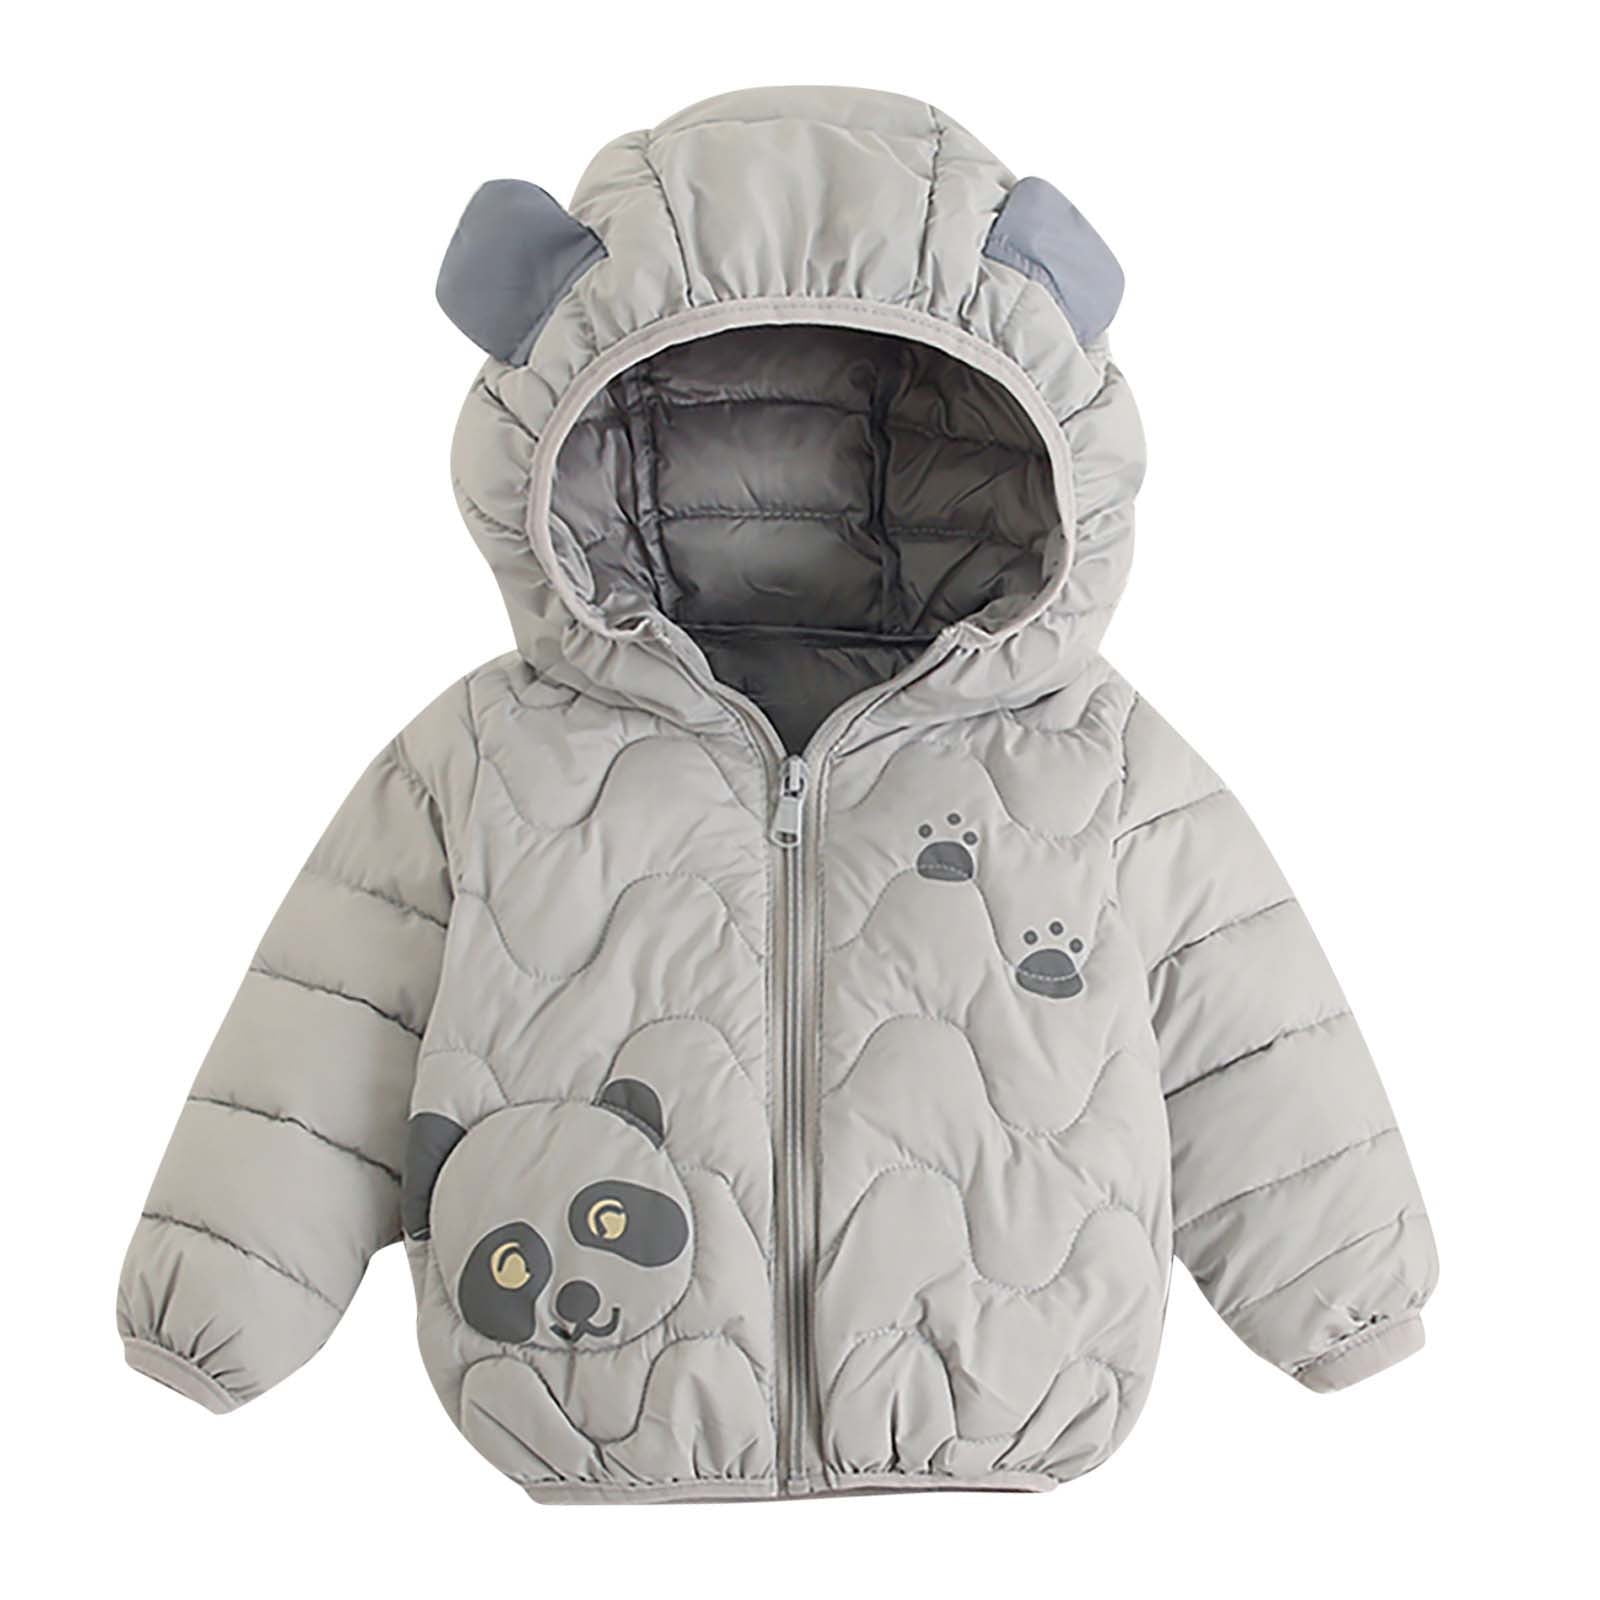 Details about   Kids Baby Boys Girls Fall/Winter Hooded Coat Toddler Faux Fur Jacket Outwear 